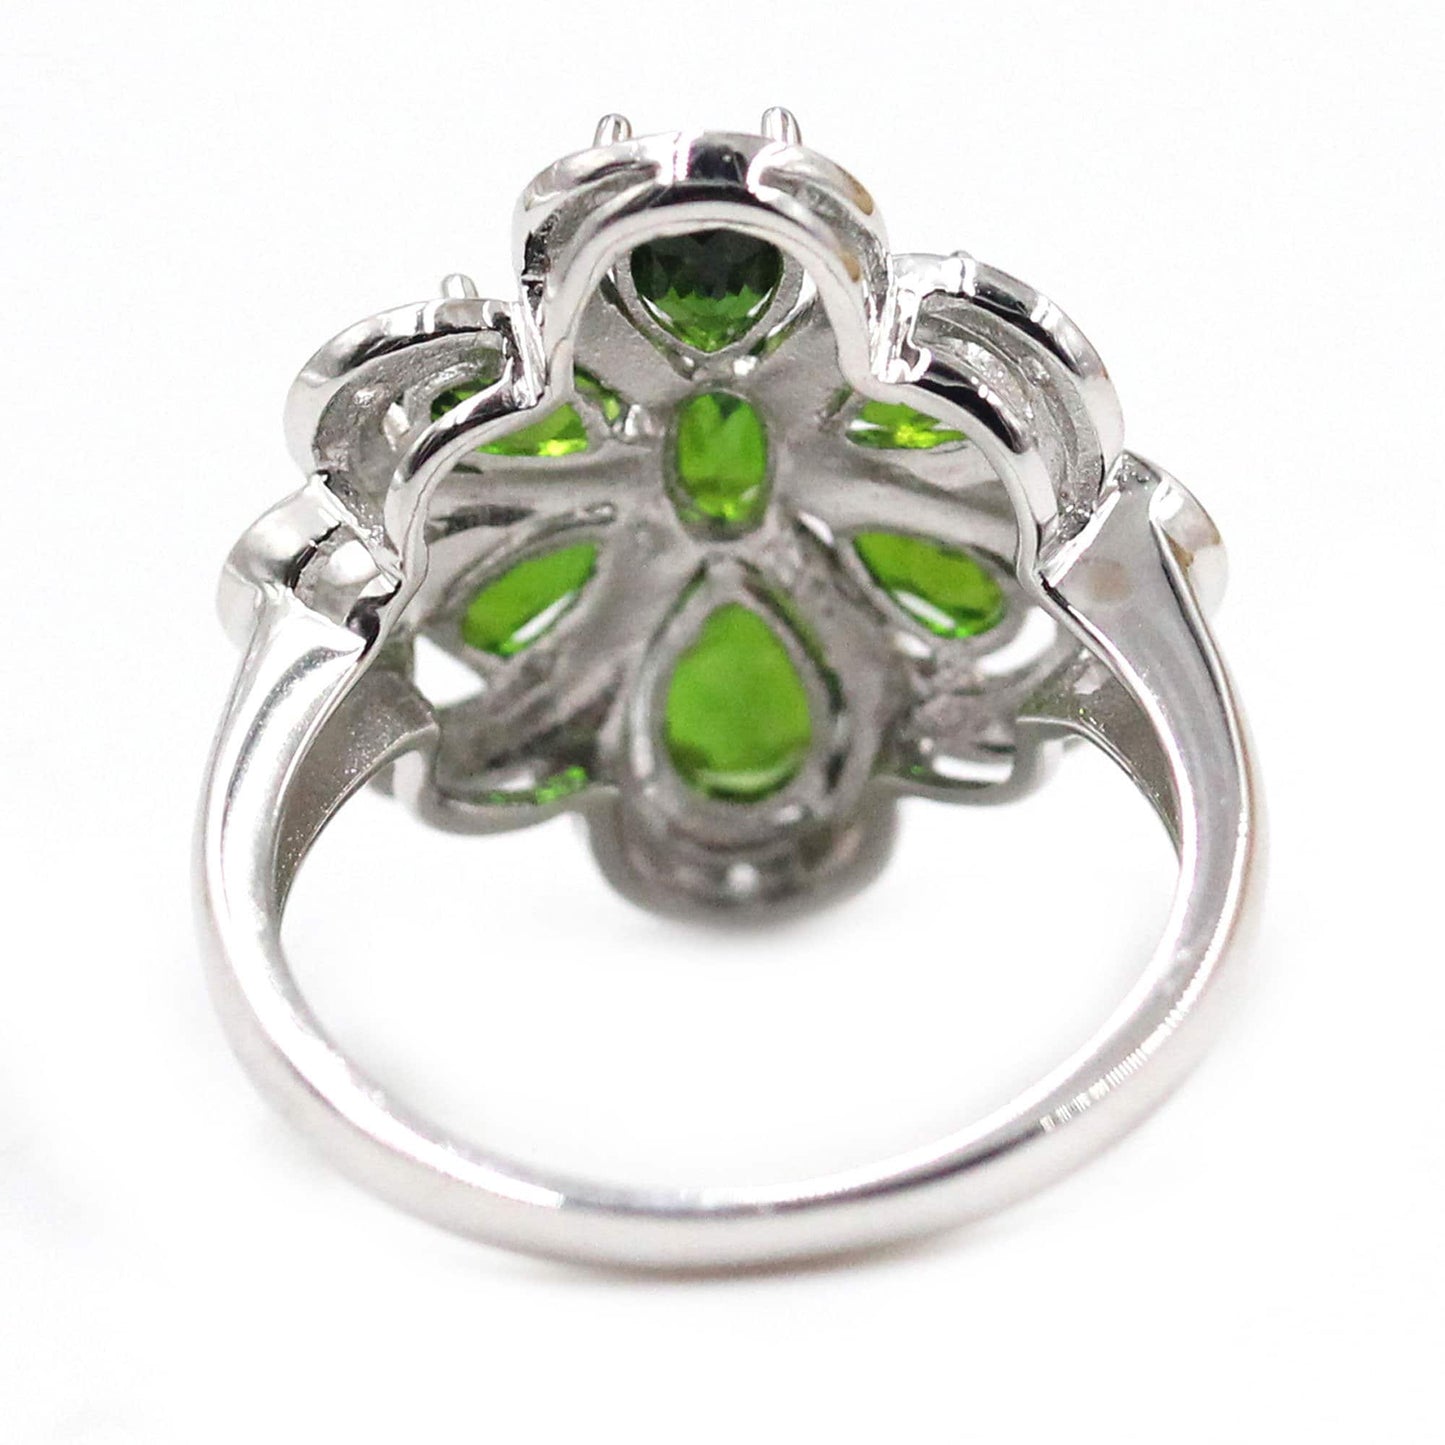 Chrome Diopside Gemstone Ring, 925 Sterling Silver Ring, Engagement Ring, Birthstone Ring-Gemstone Jewelry Anniversary Gift-Gift For Her